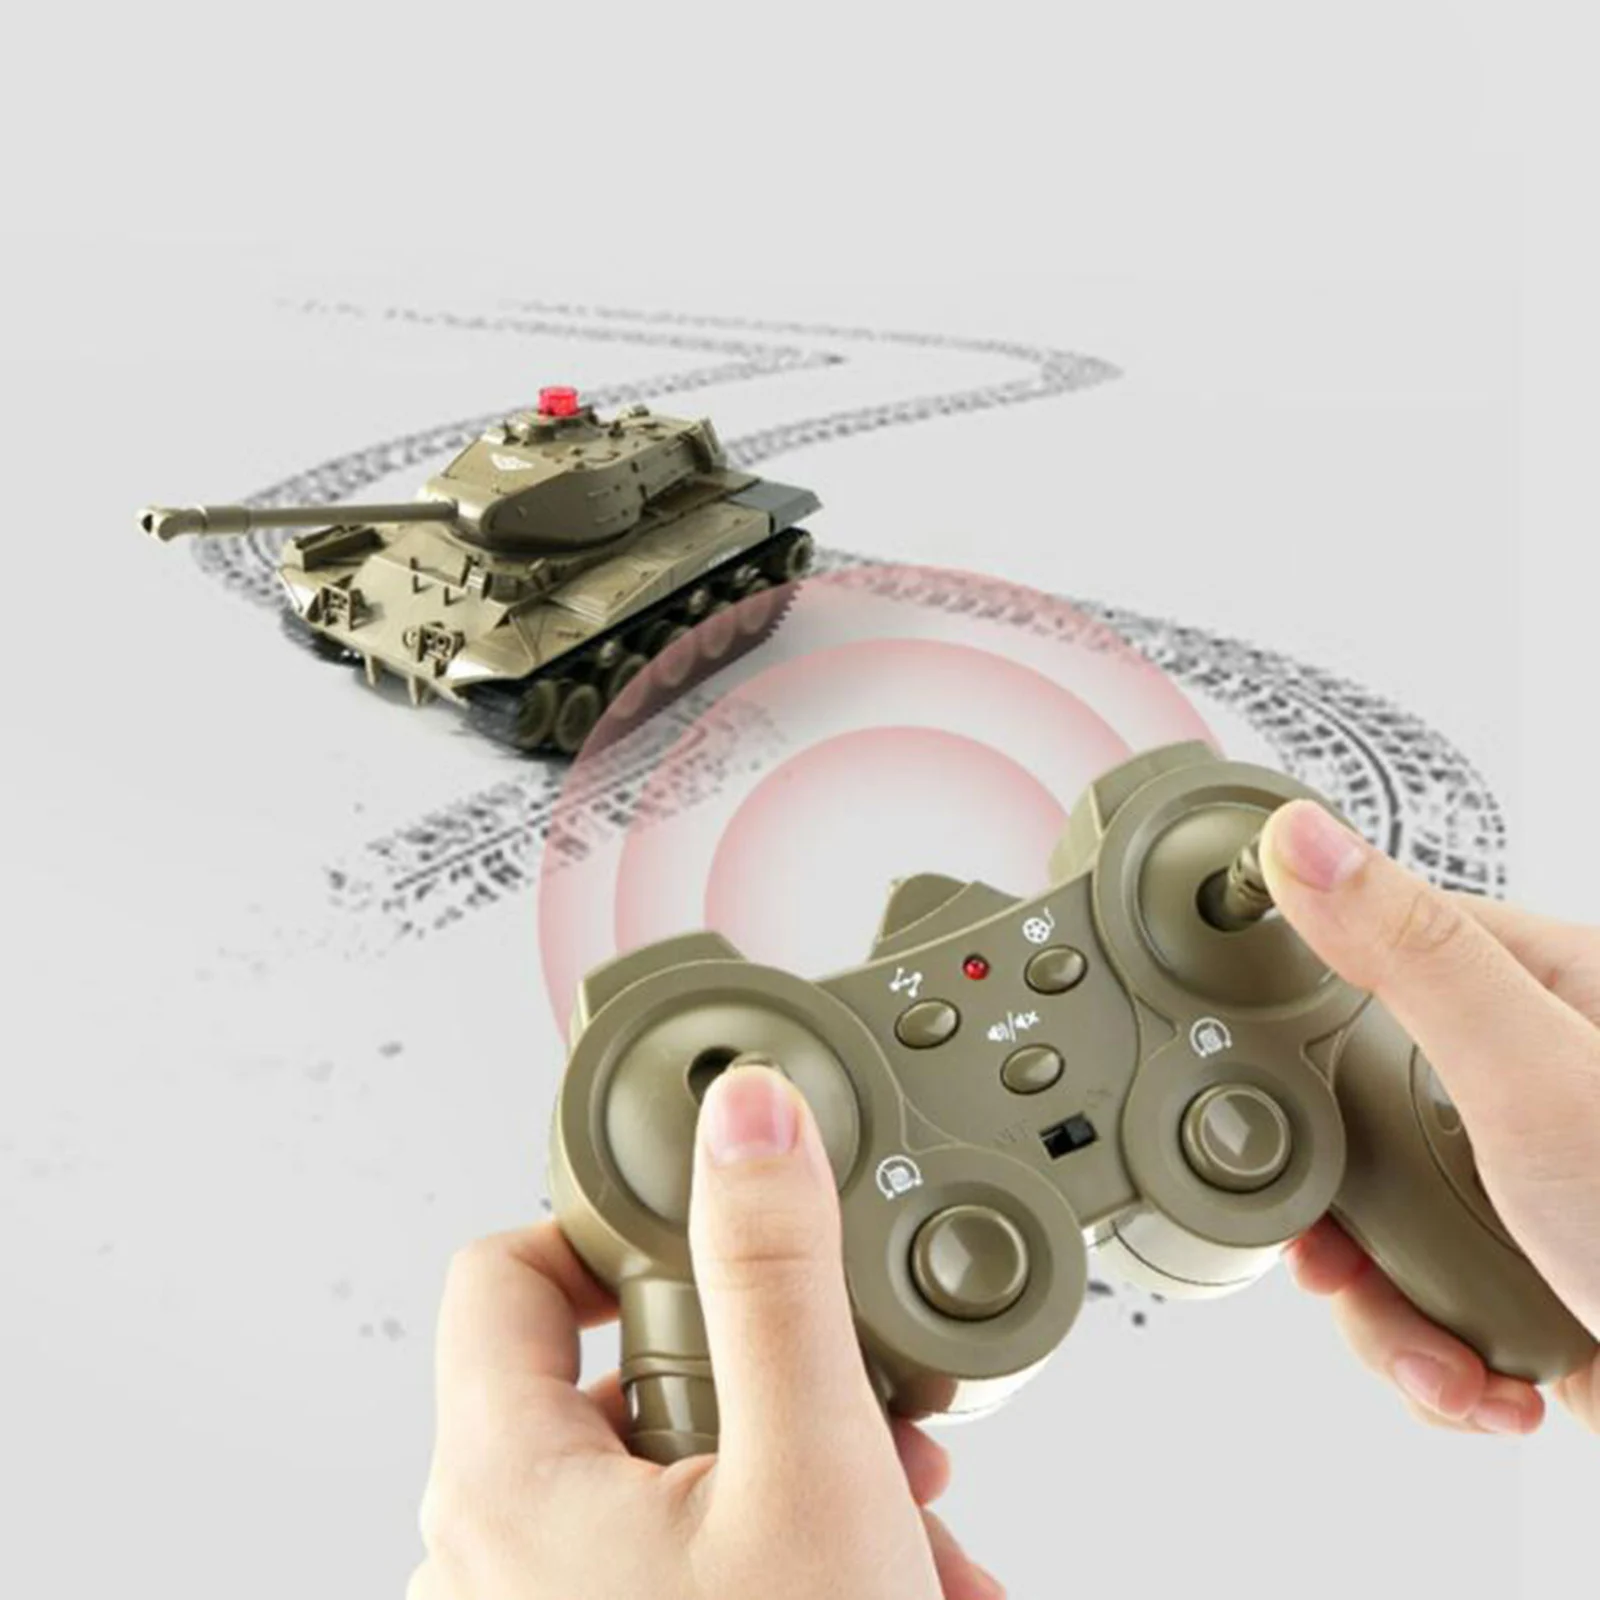 JJRC RC Tank Remote Control Battle Tank Toy That Shoots with Lights & Realistic Sounds RC Vehicle 270Rotational Toy Truck